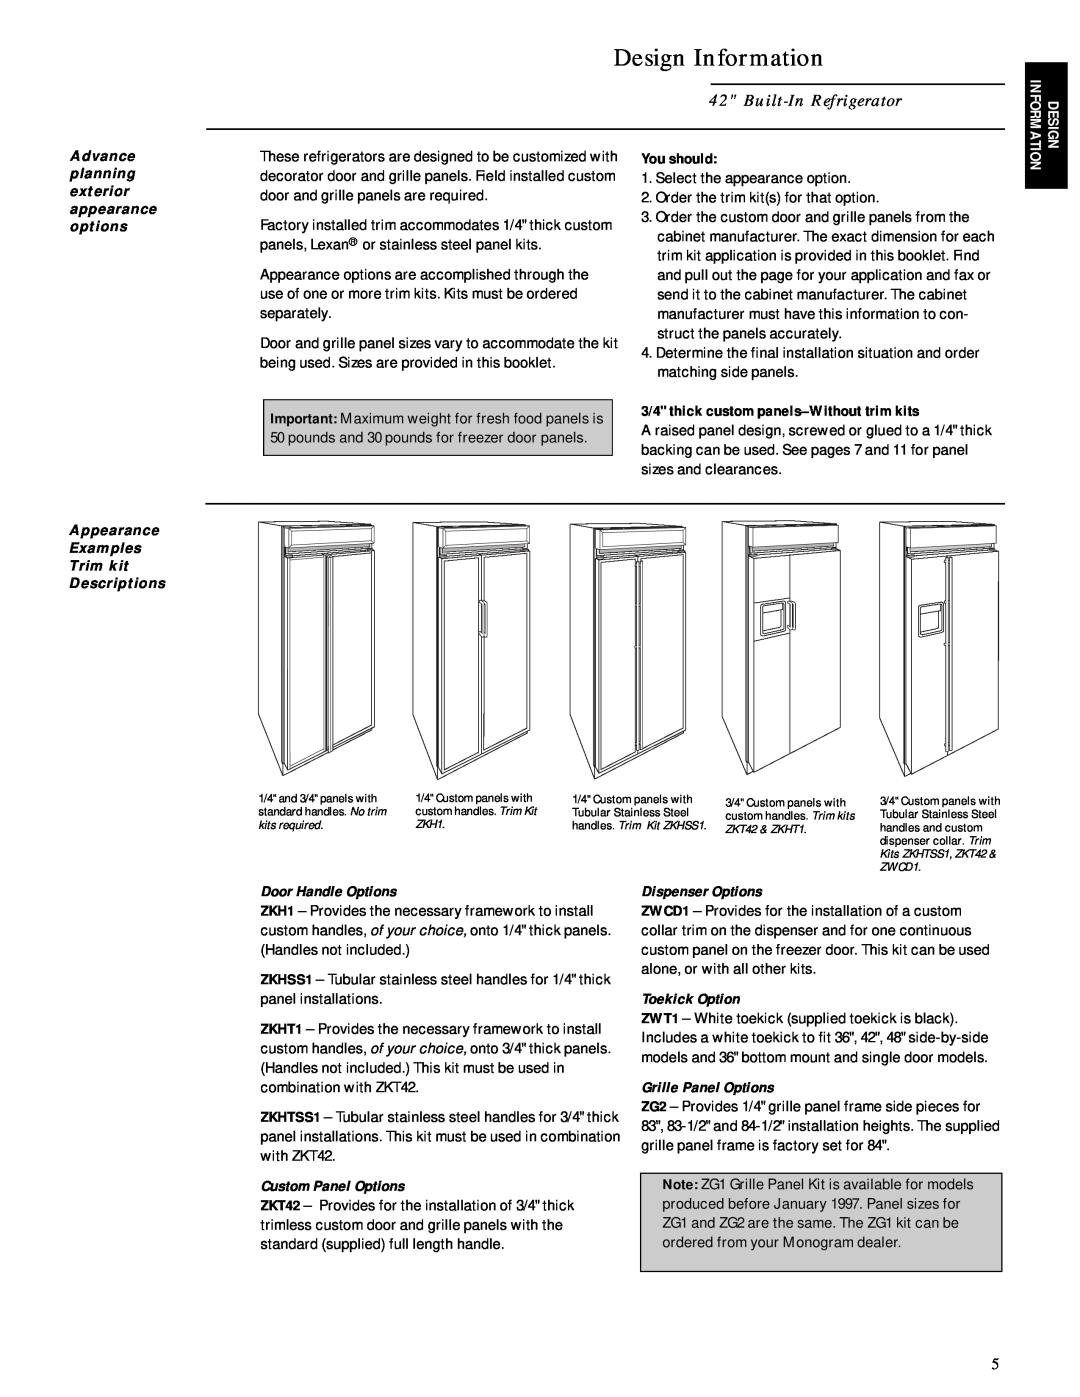 GE Monogram ZISW42D Design Information, Built-In Refrigerator, You should, 3/4 thick custom panels-Without trim kits 